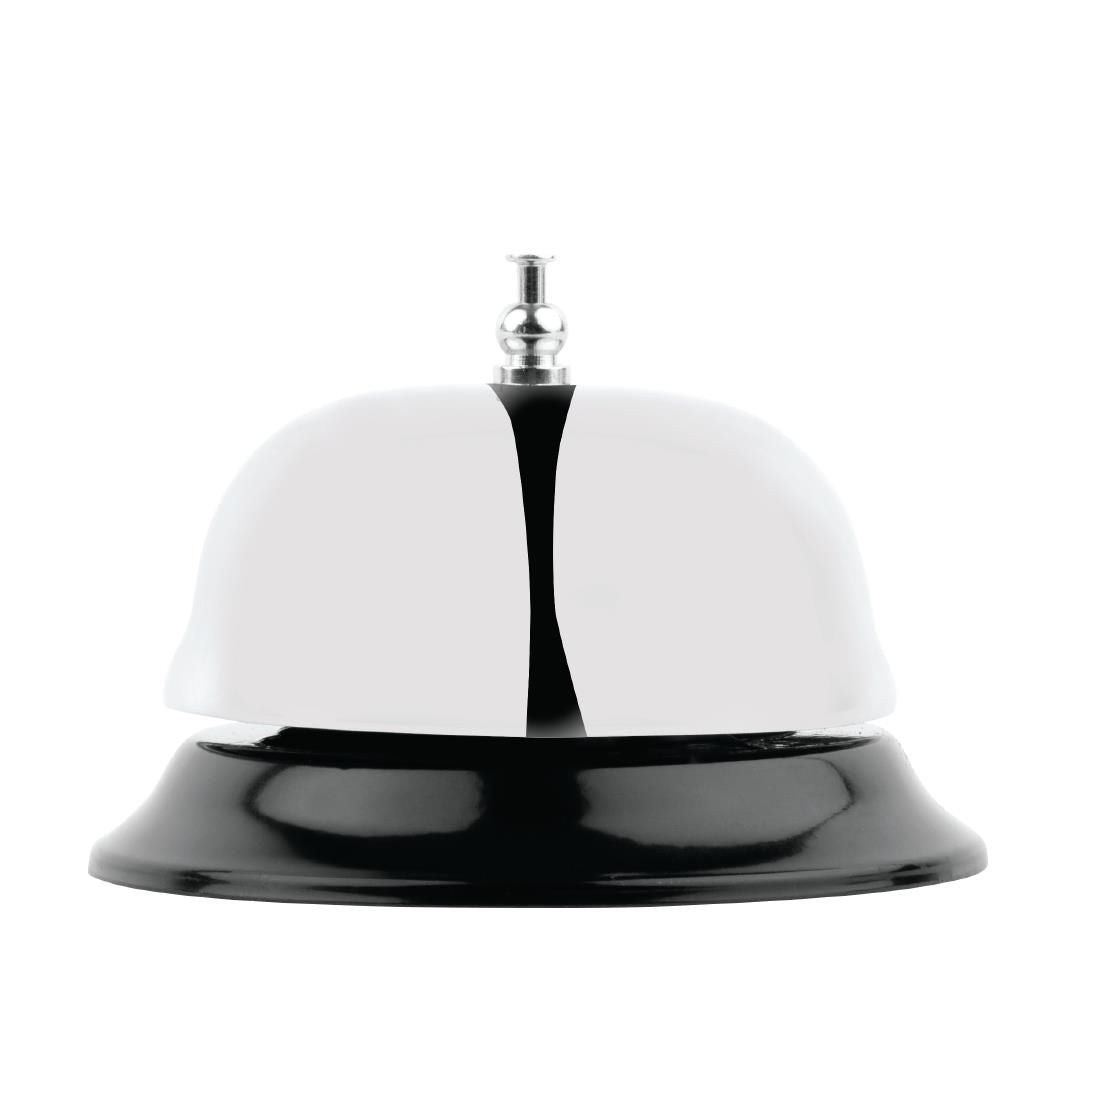 Large Call Bell JD Catering Equipment Solutions Ltd